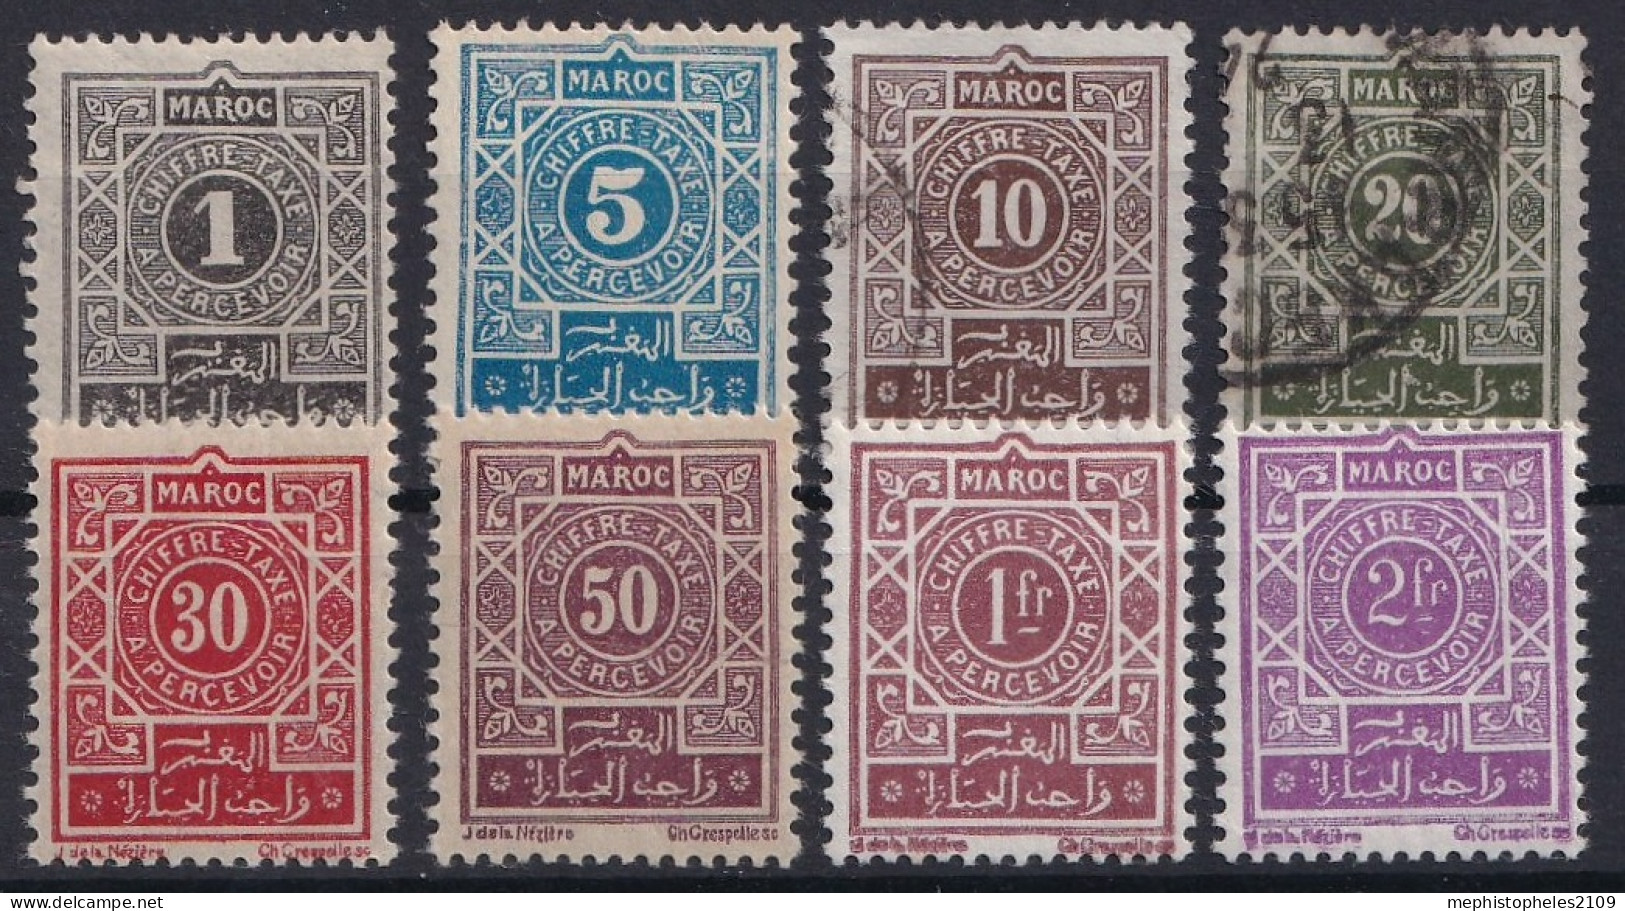 MAROC 1917-26 - MLH/canceled - YT 27-34 - Chiffre Taxe - Complete Set! - Postage Due